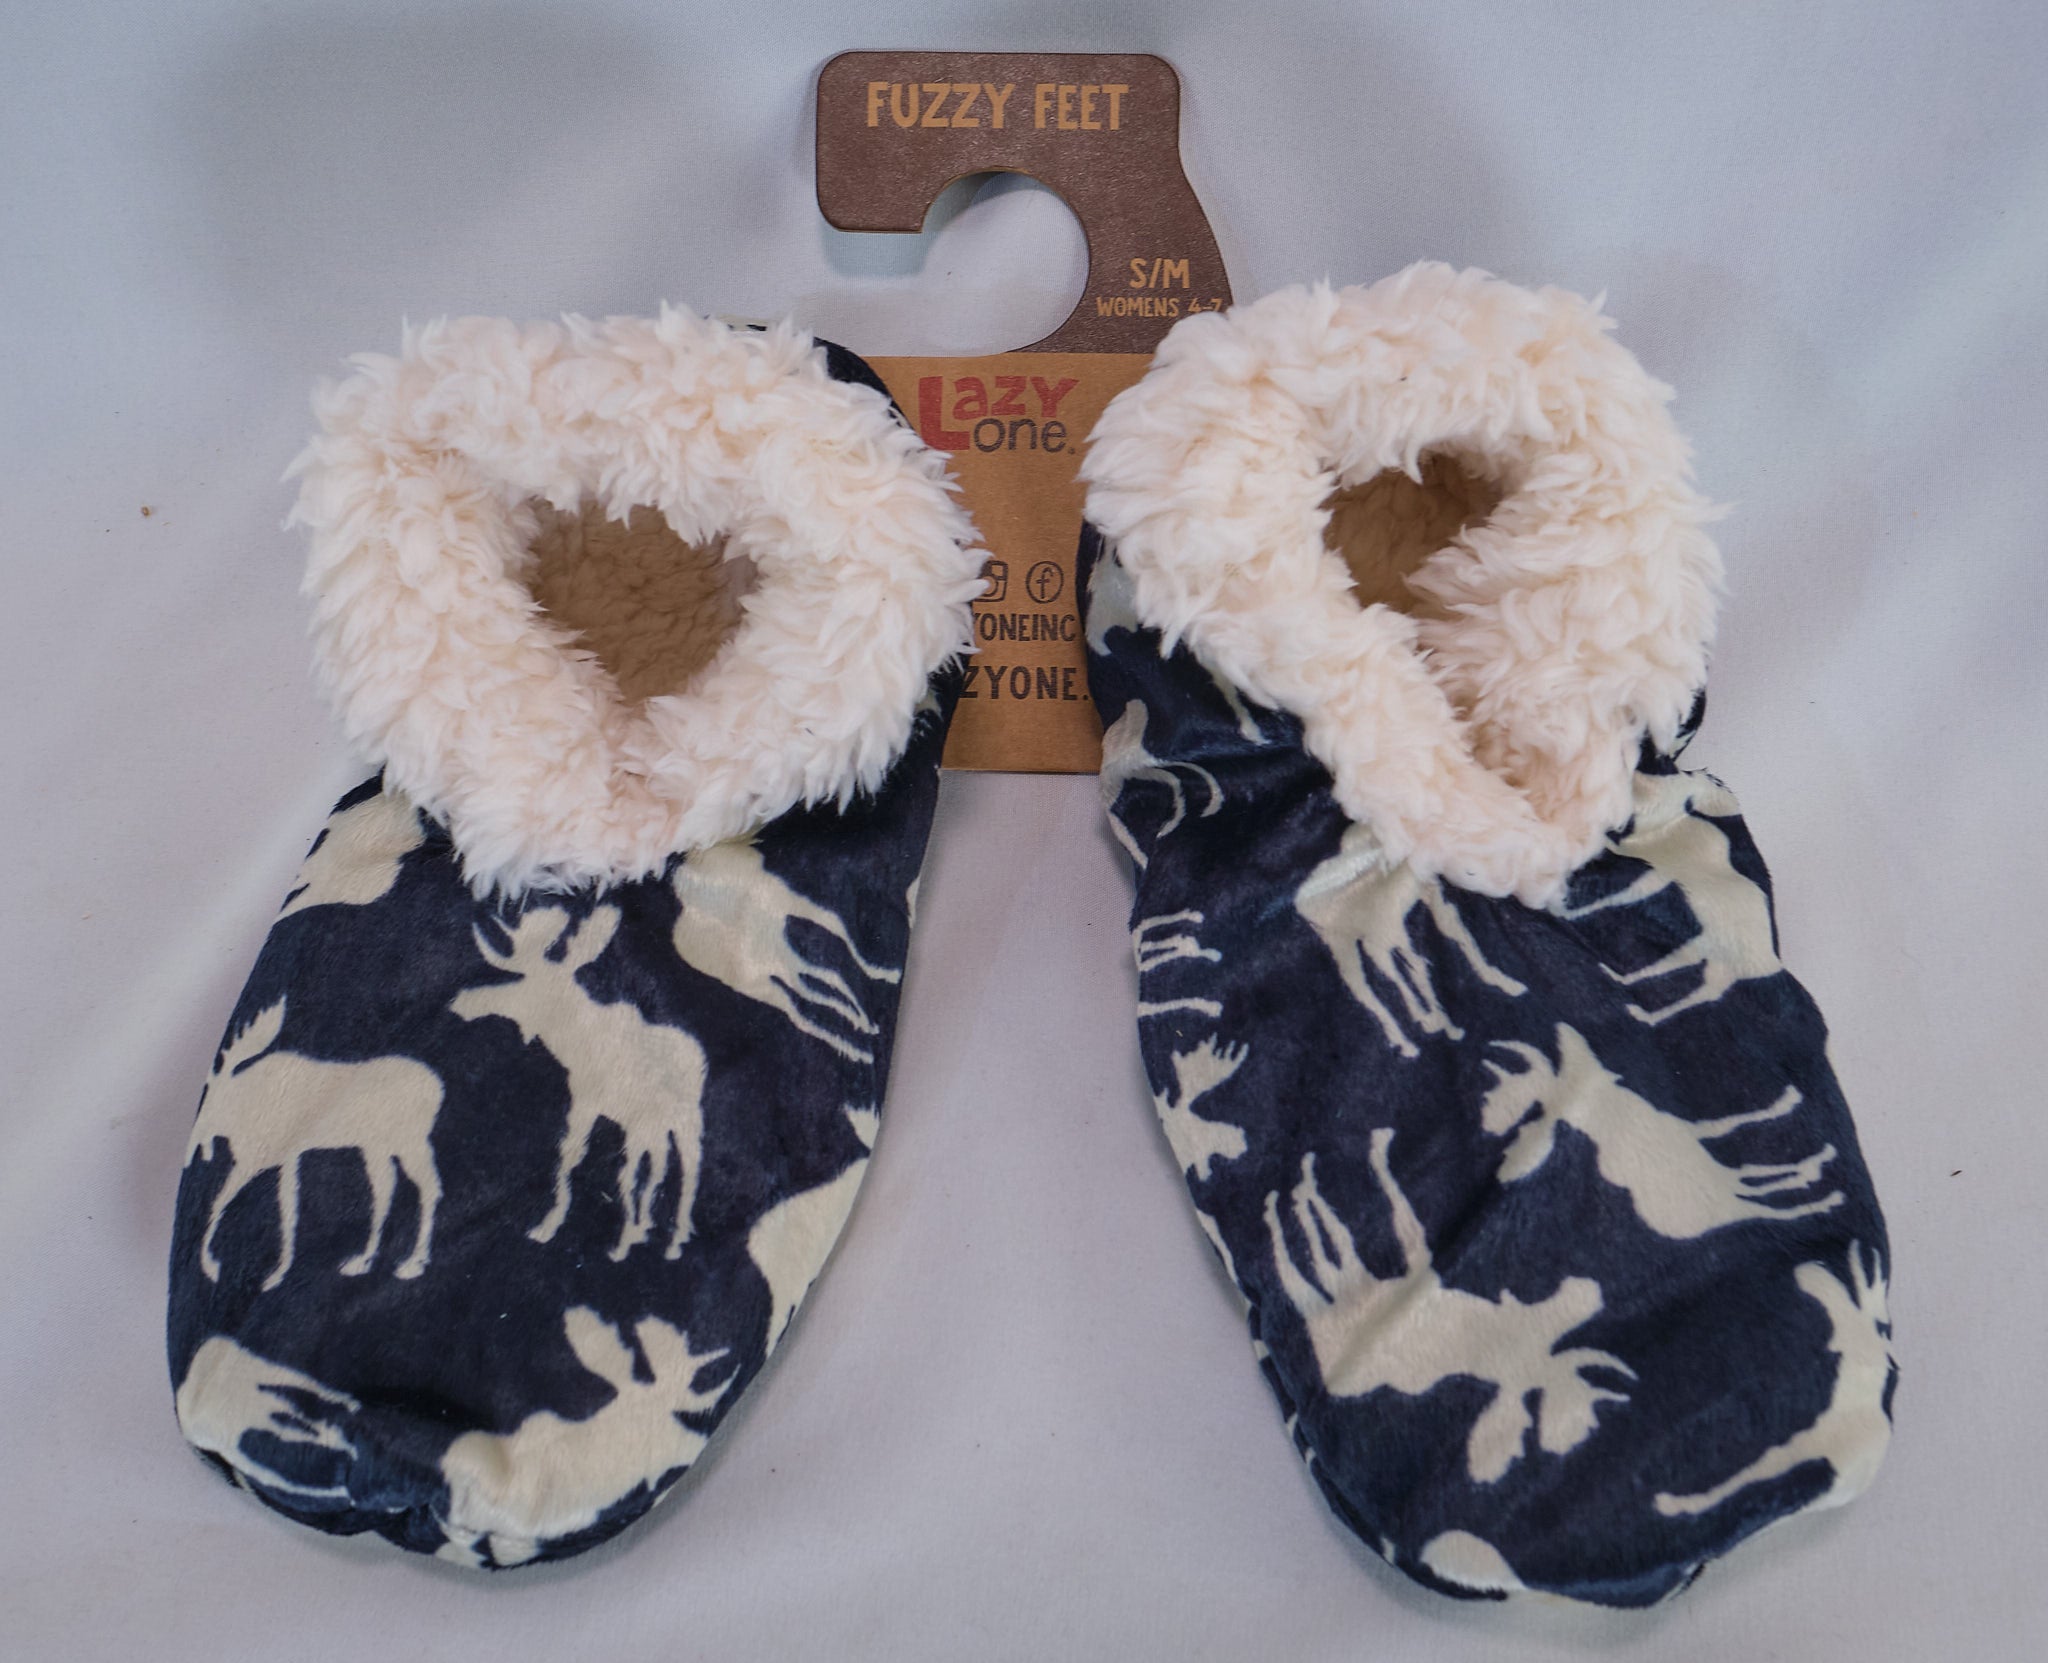 Classic Moose Fuzzy Slippers sm/md